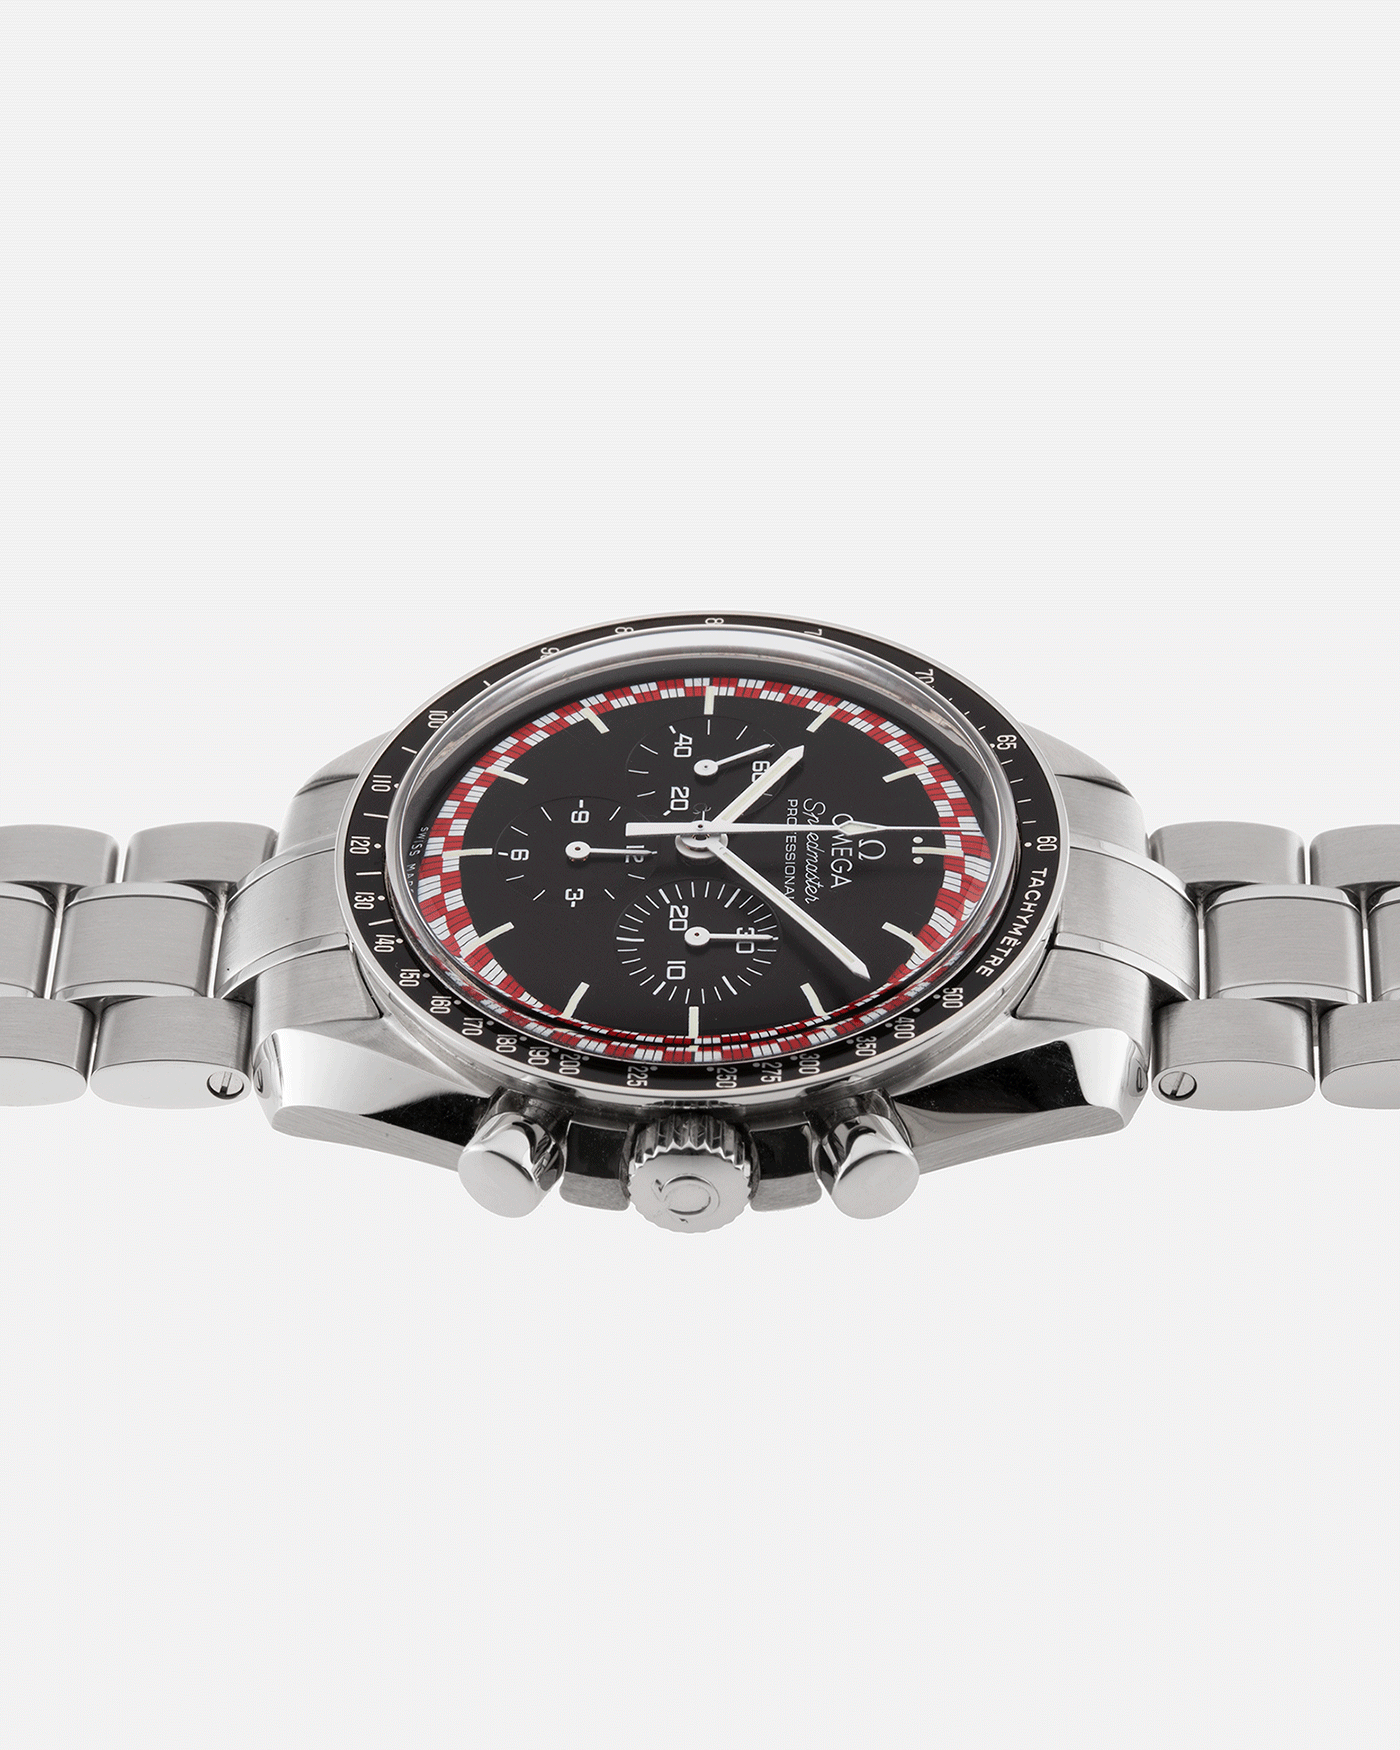 Brand: Omega Year: 2017 Model: Speedmaster Racing ‘Tin Tin’ Reference Number: 311.30.42.30.01.004 Material: Stainless Steel Movement: Omega in-house Cal. 1861 Case Diameter: 40mm Bracelet/Strap: Omega Speedmaster Bracelet